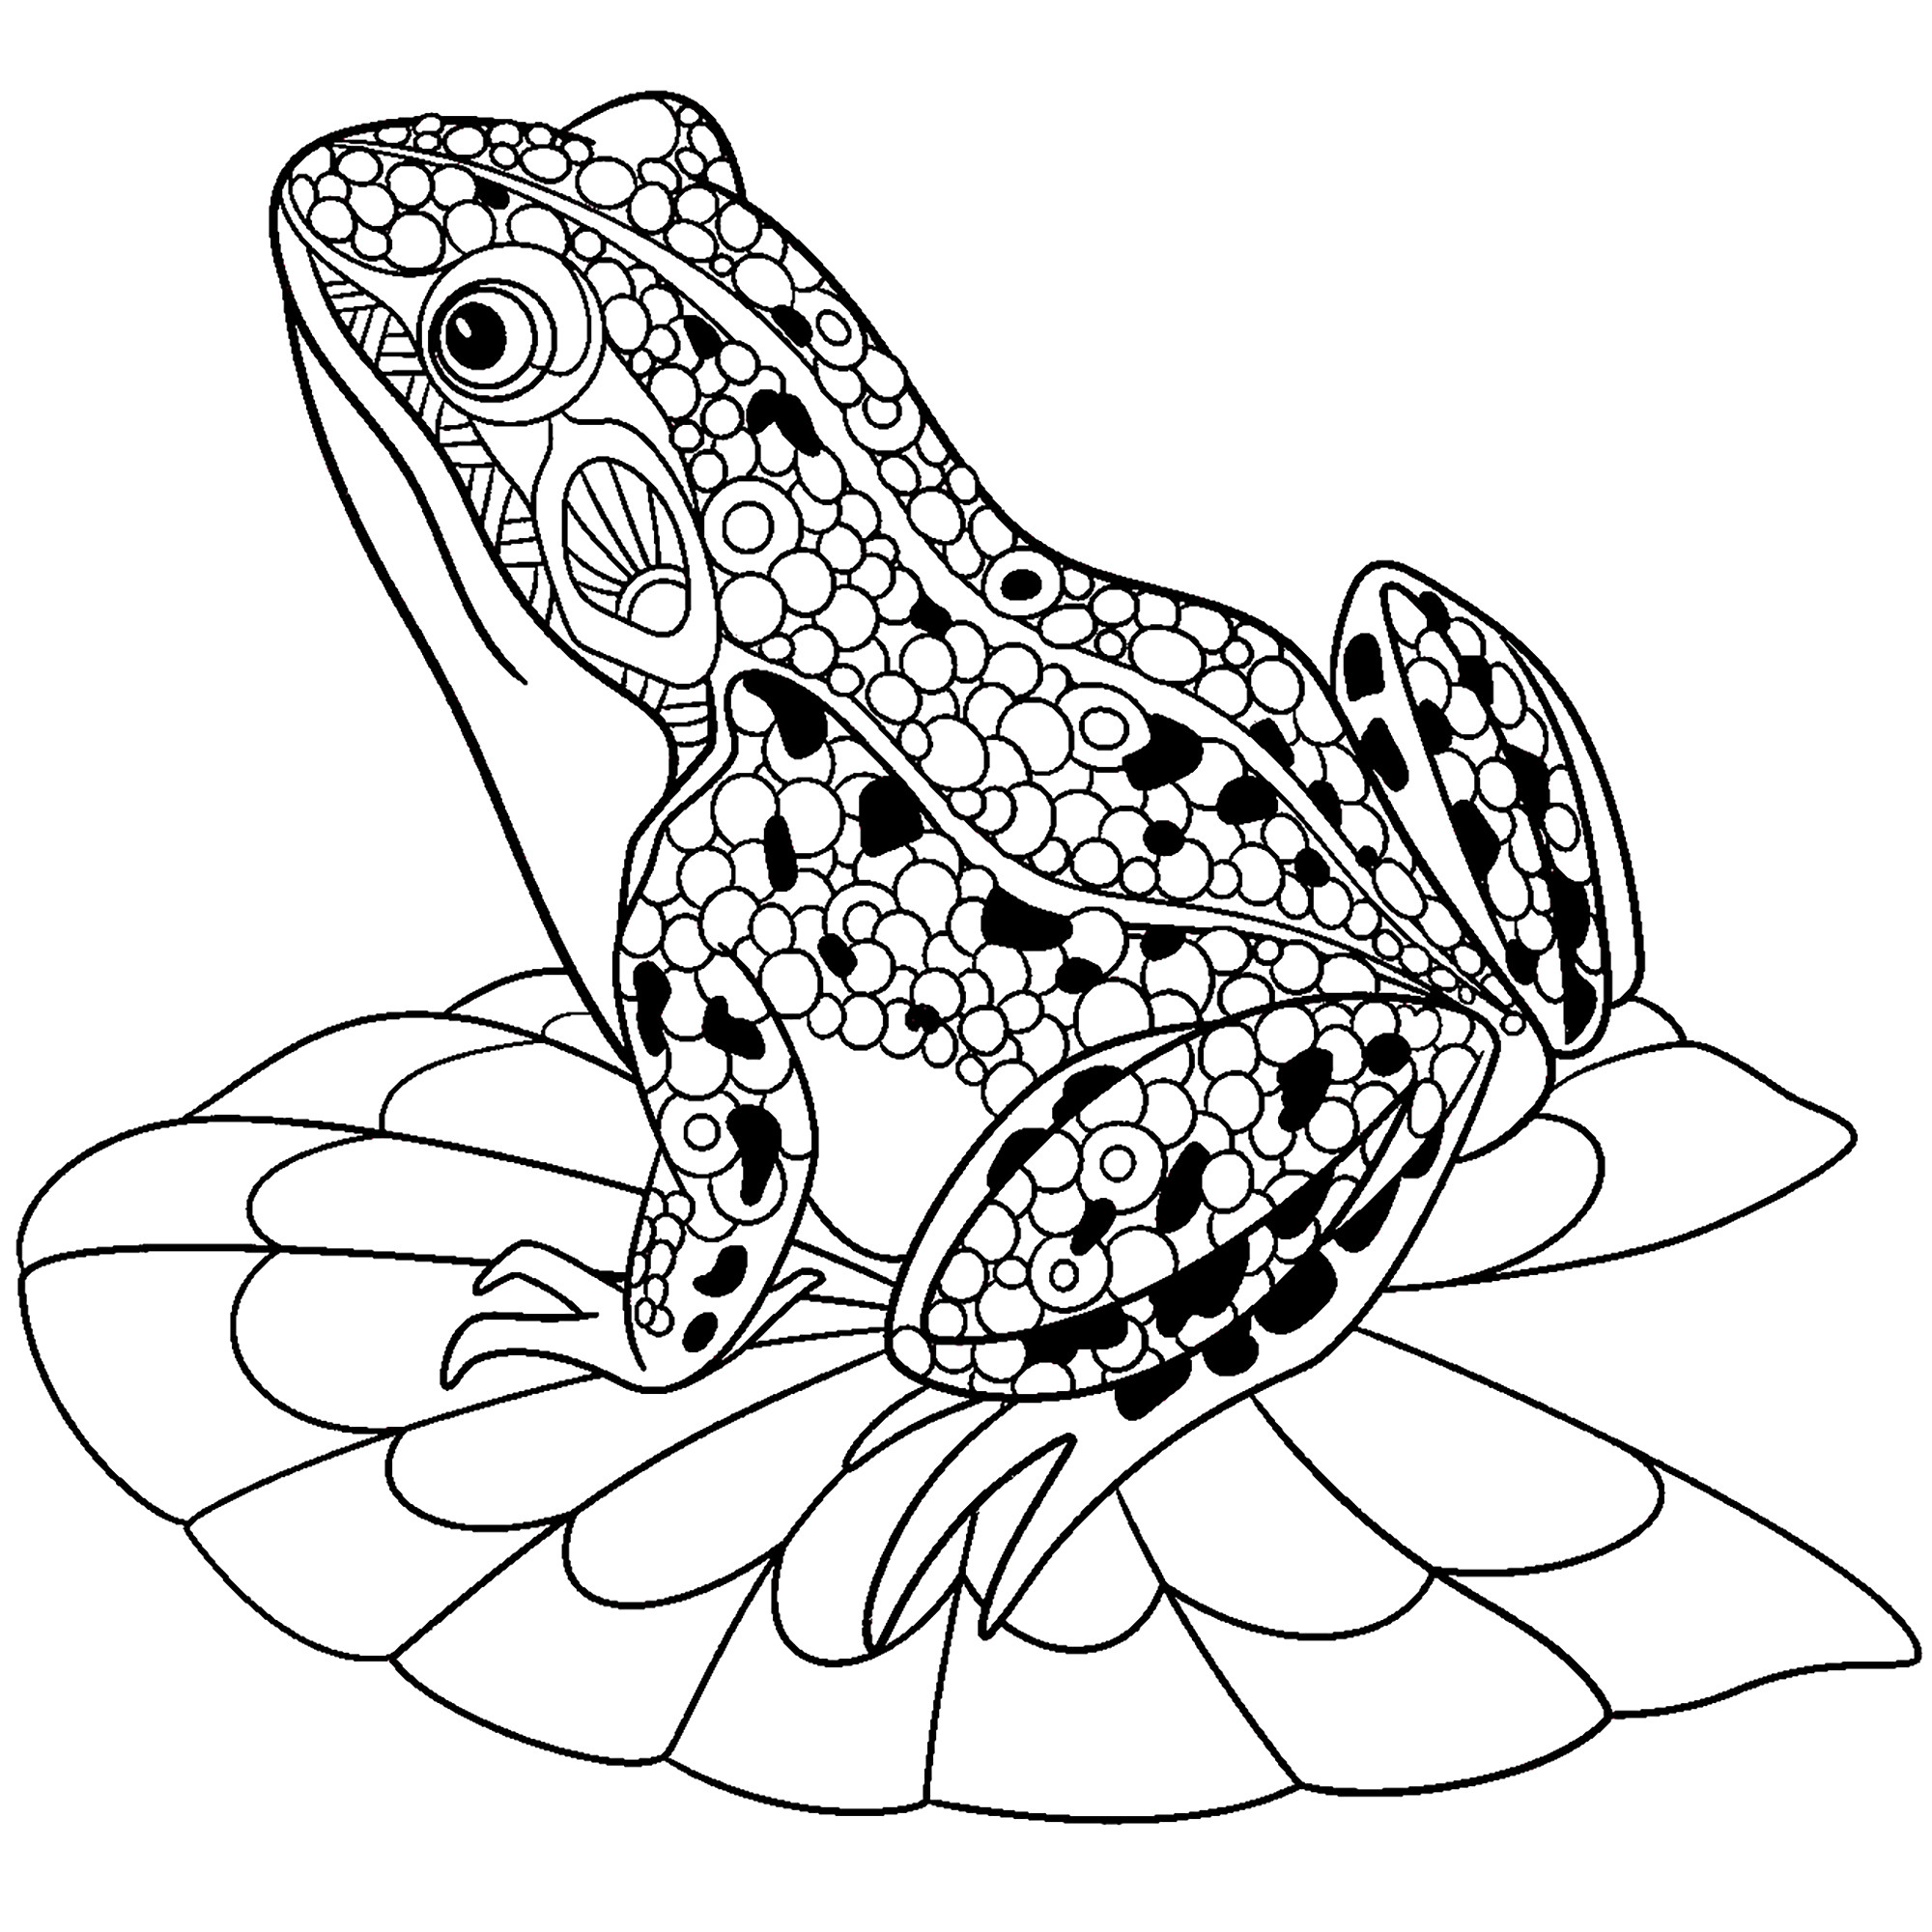 Frog Coloring Pages For Kids
 Frogs free to color for children Frogs Kids Coloring Pages